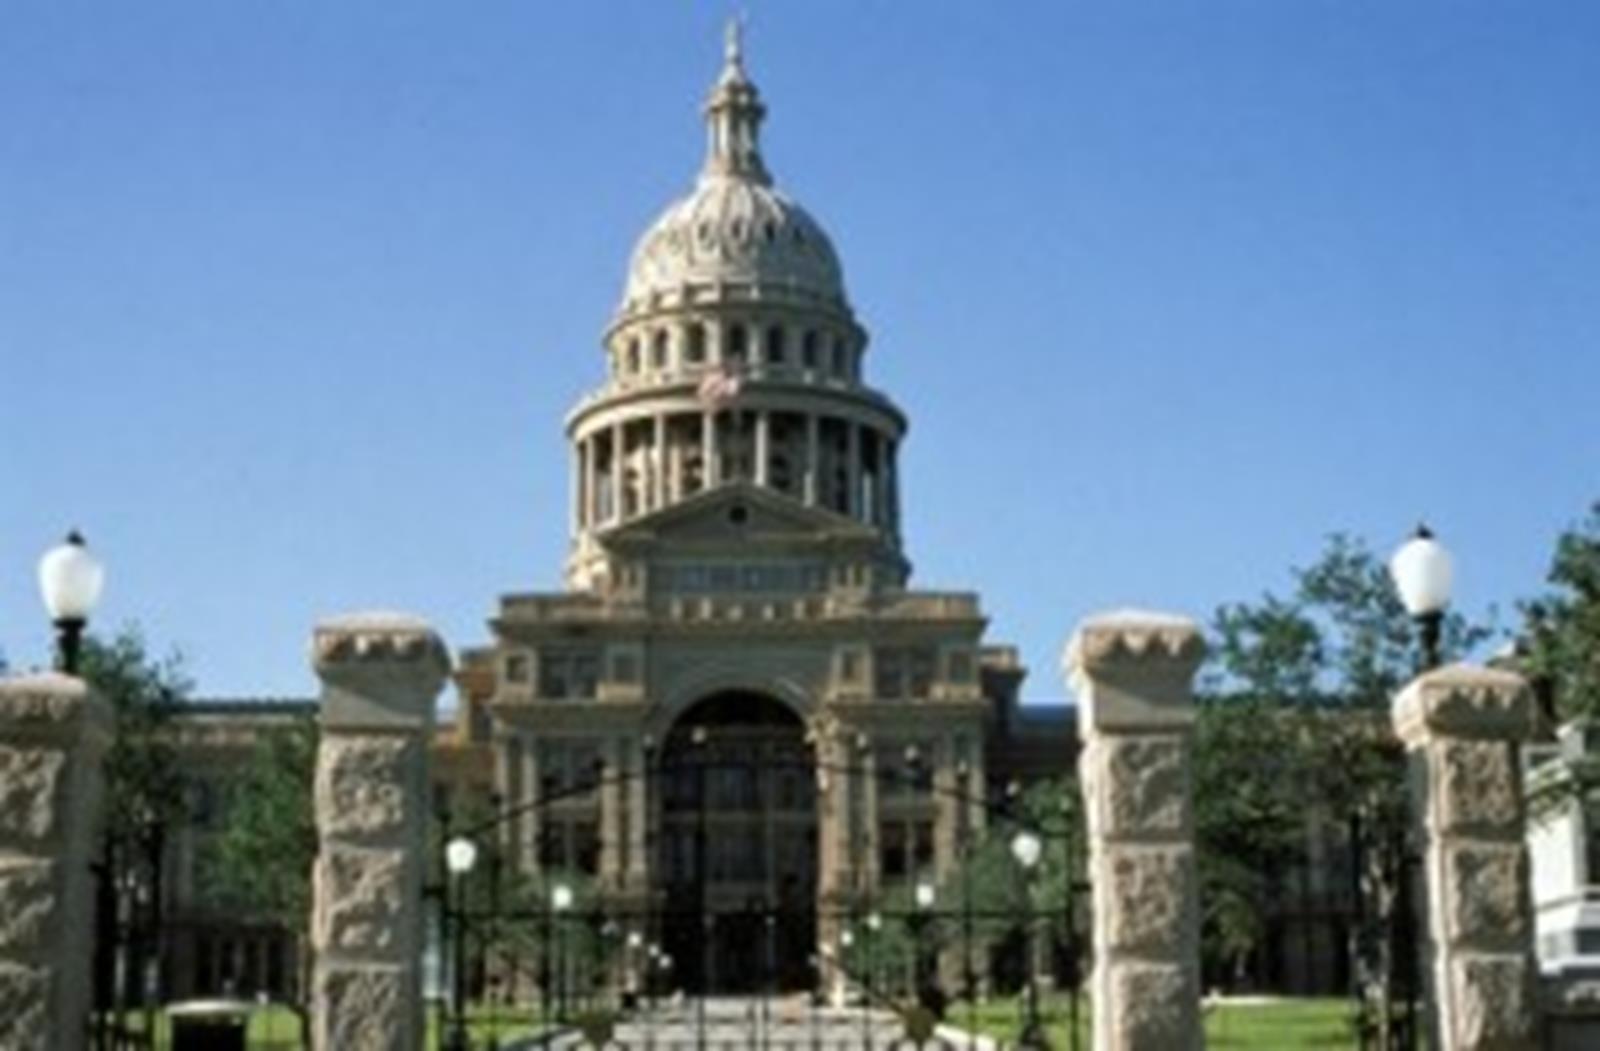 Tour the second largest state capitol in Ausin, Texas. (Photo Courtesy of ACVB Photo)